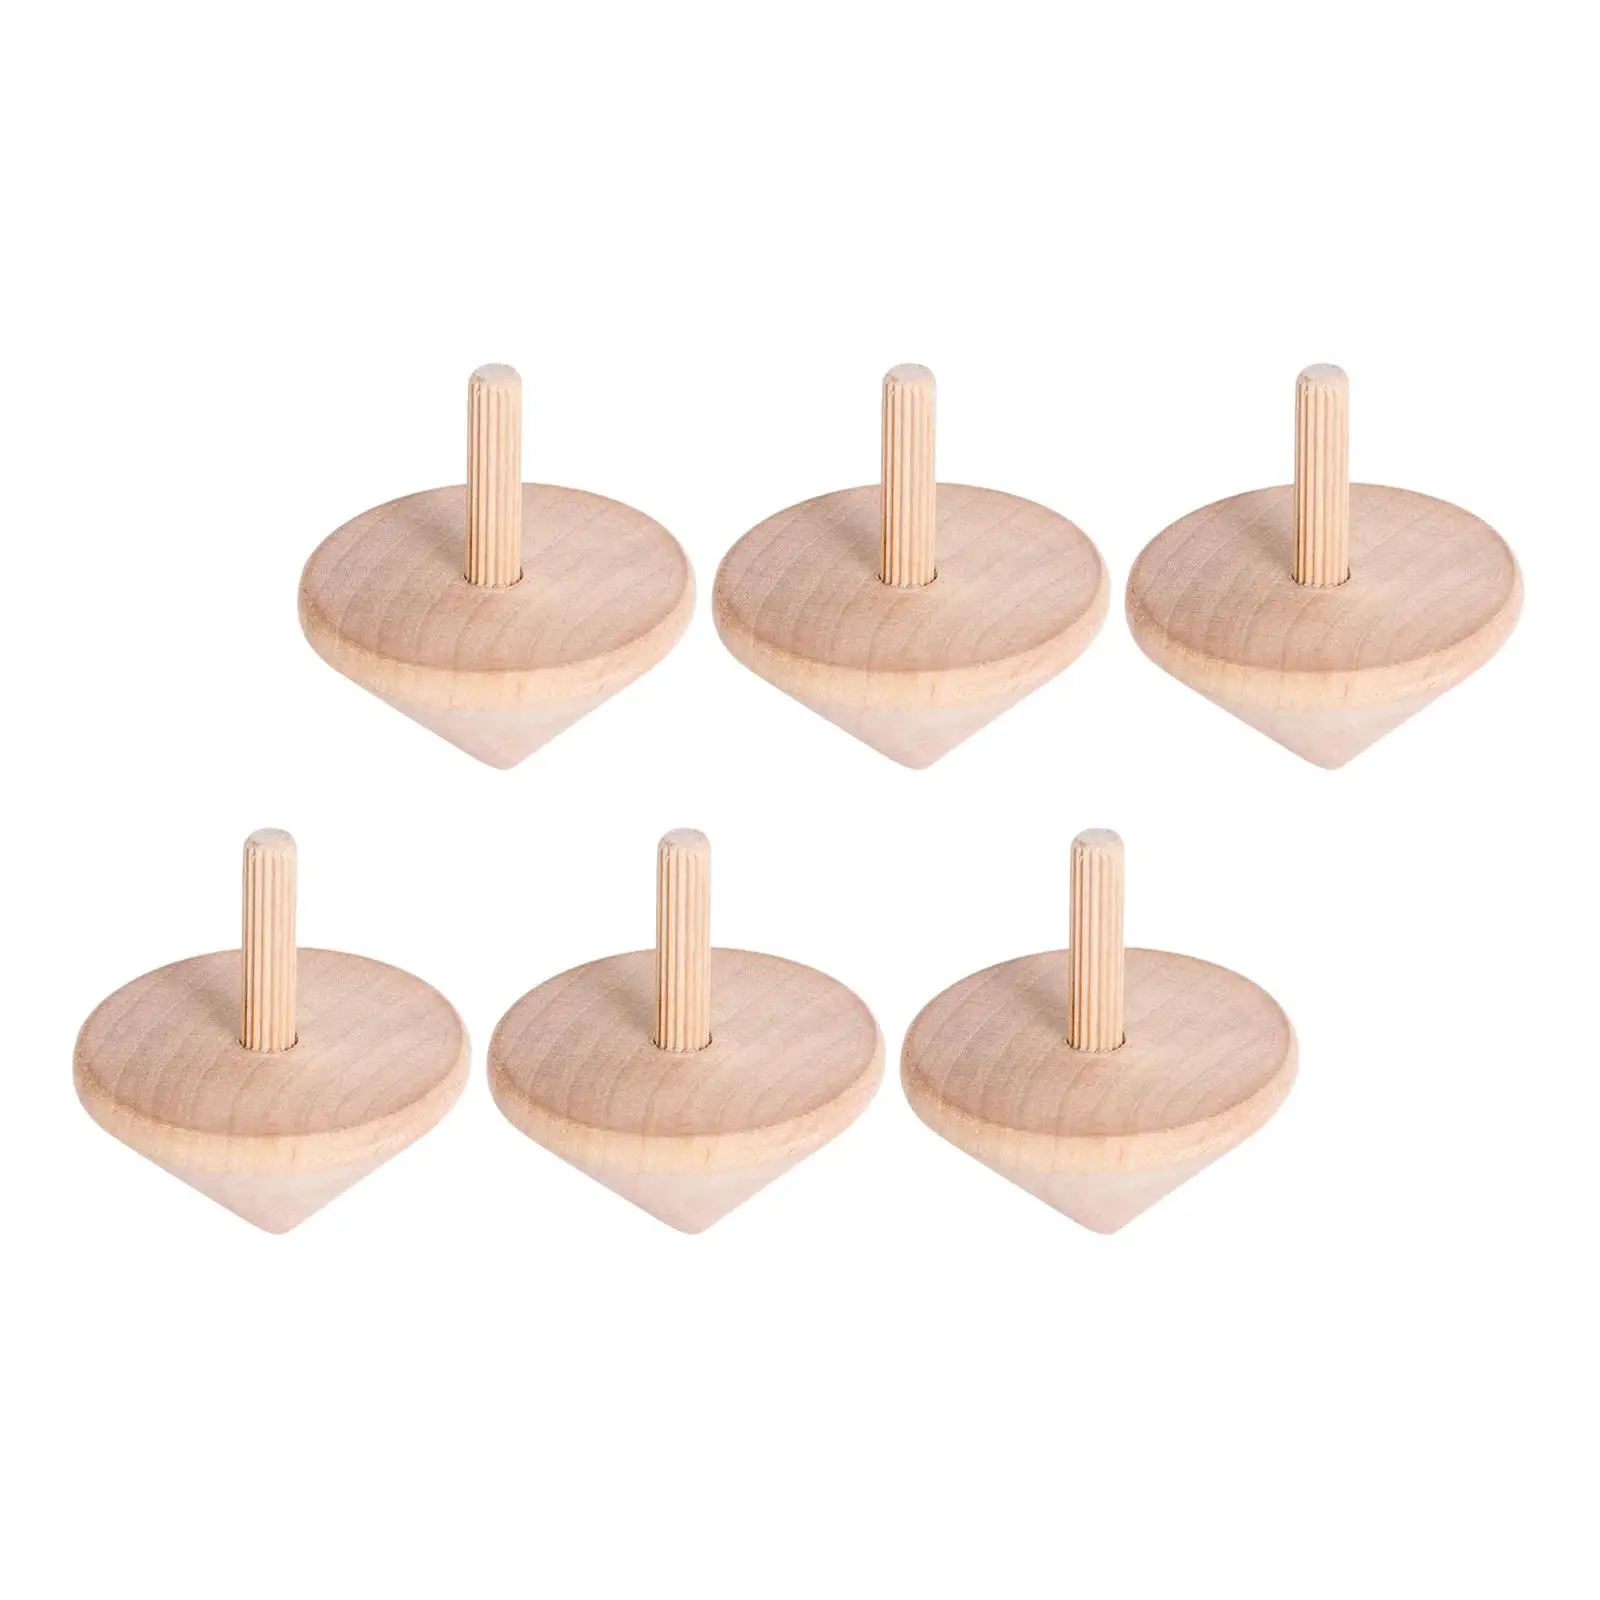 6Pcs Unpainted Wood Blank Tops Educational Toys Wooden Top Handmade DIY for Toddlers Children Games Party Supplies Gift